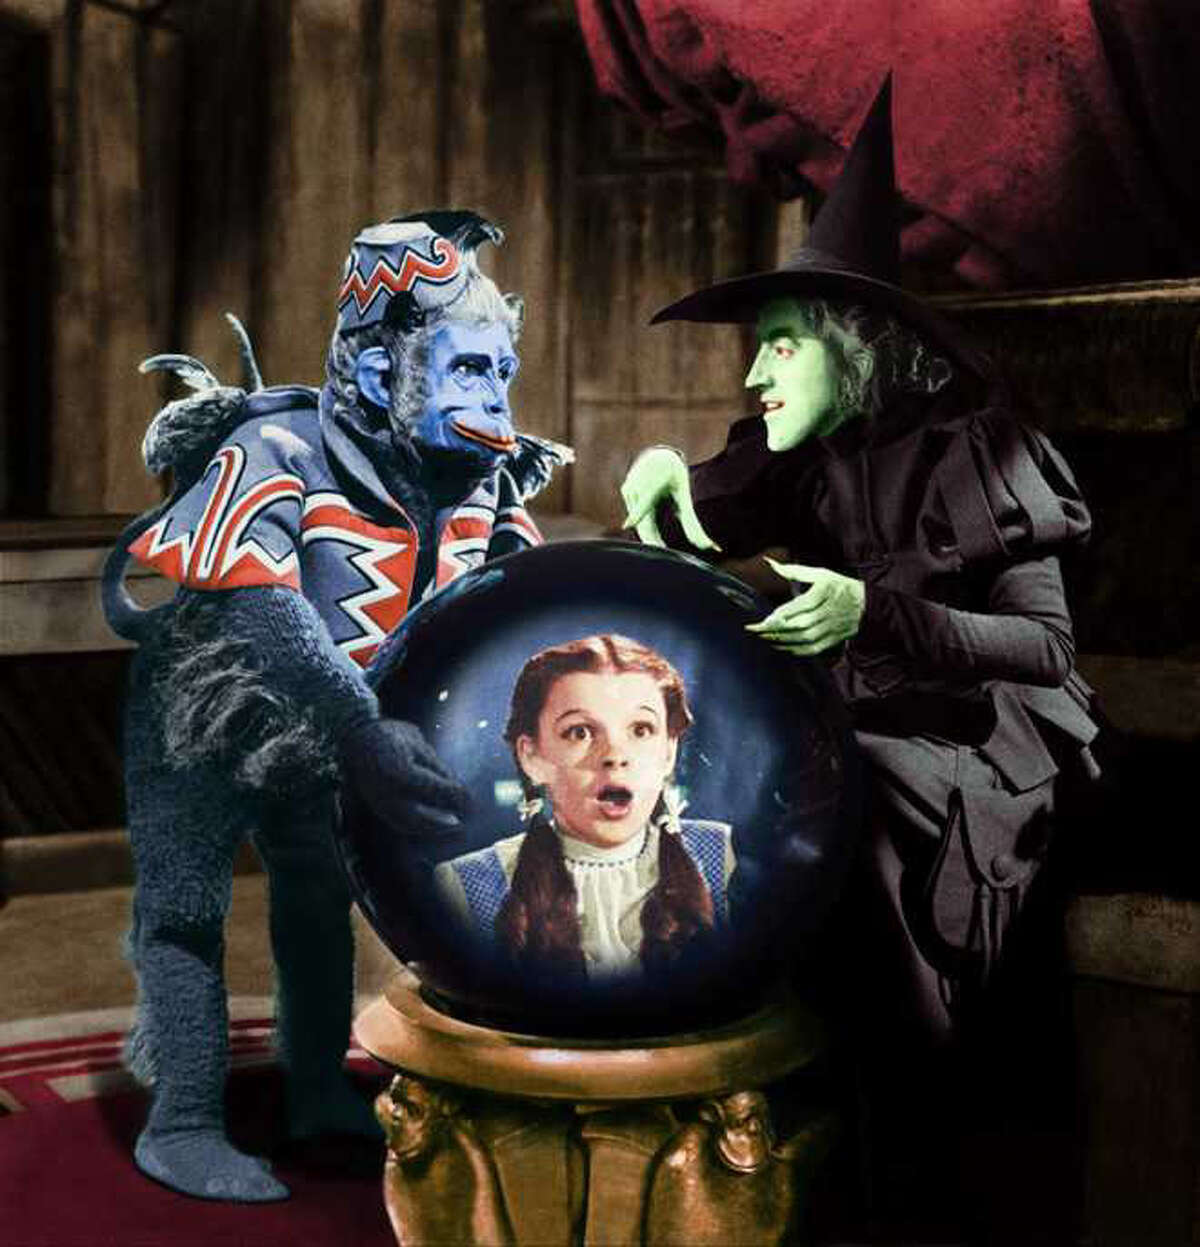 Flying Monkey, Dorothy (Judy Garland) and the Wicked Witch of the West (Margaret Hamilton).